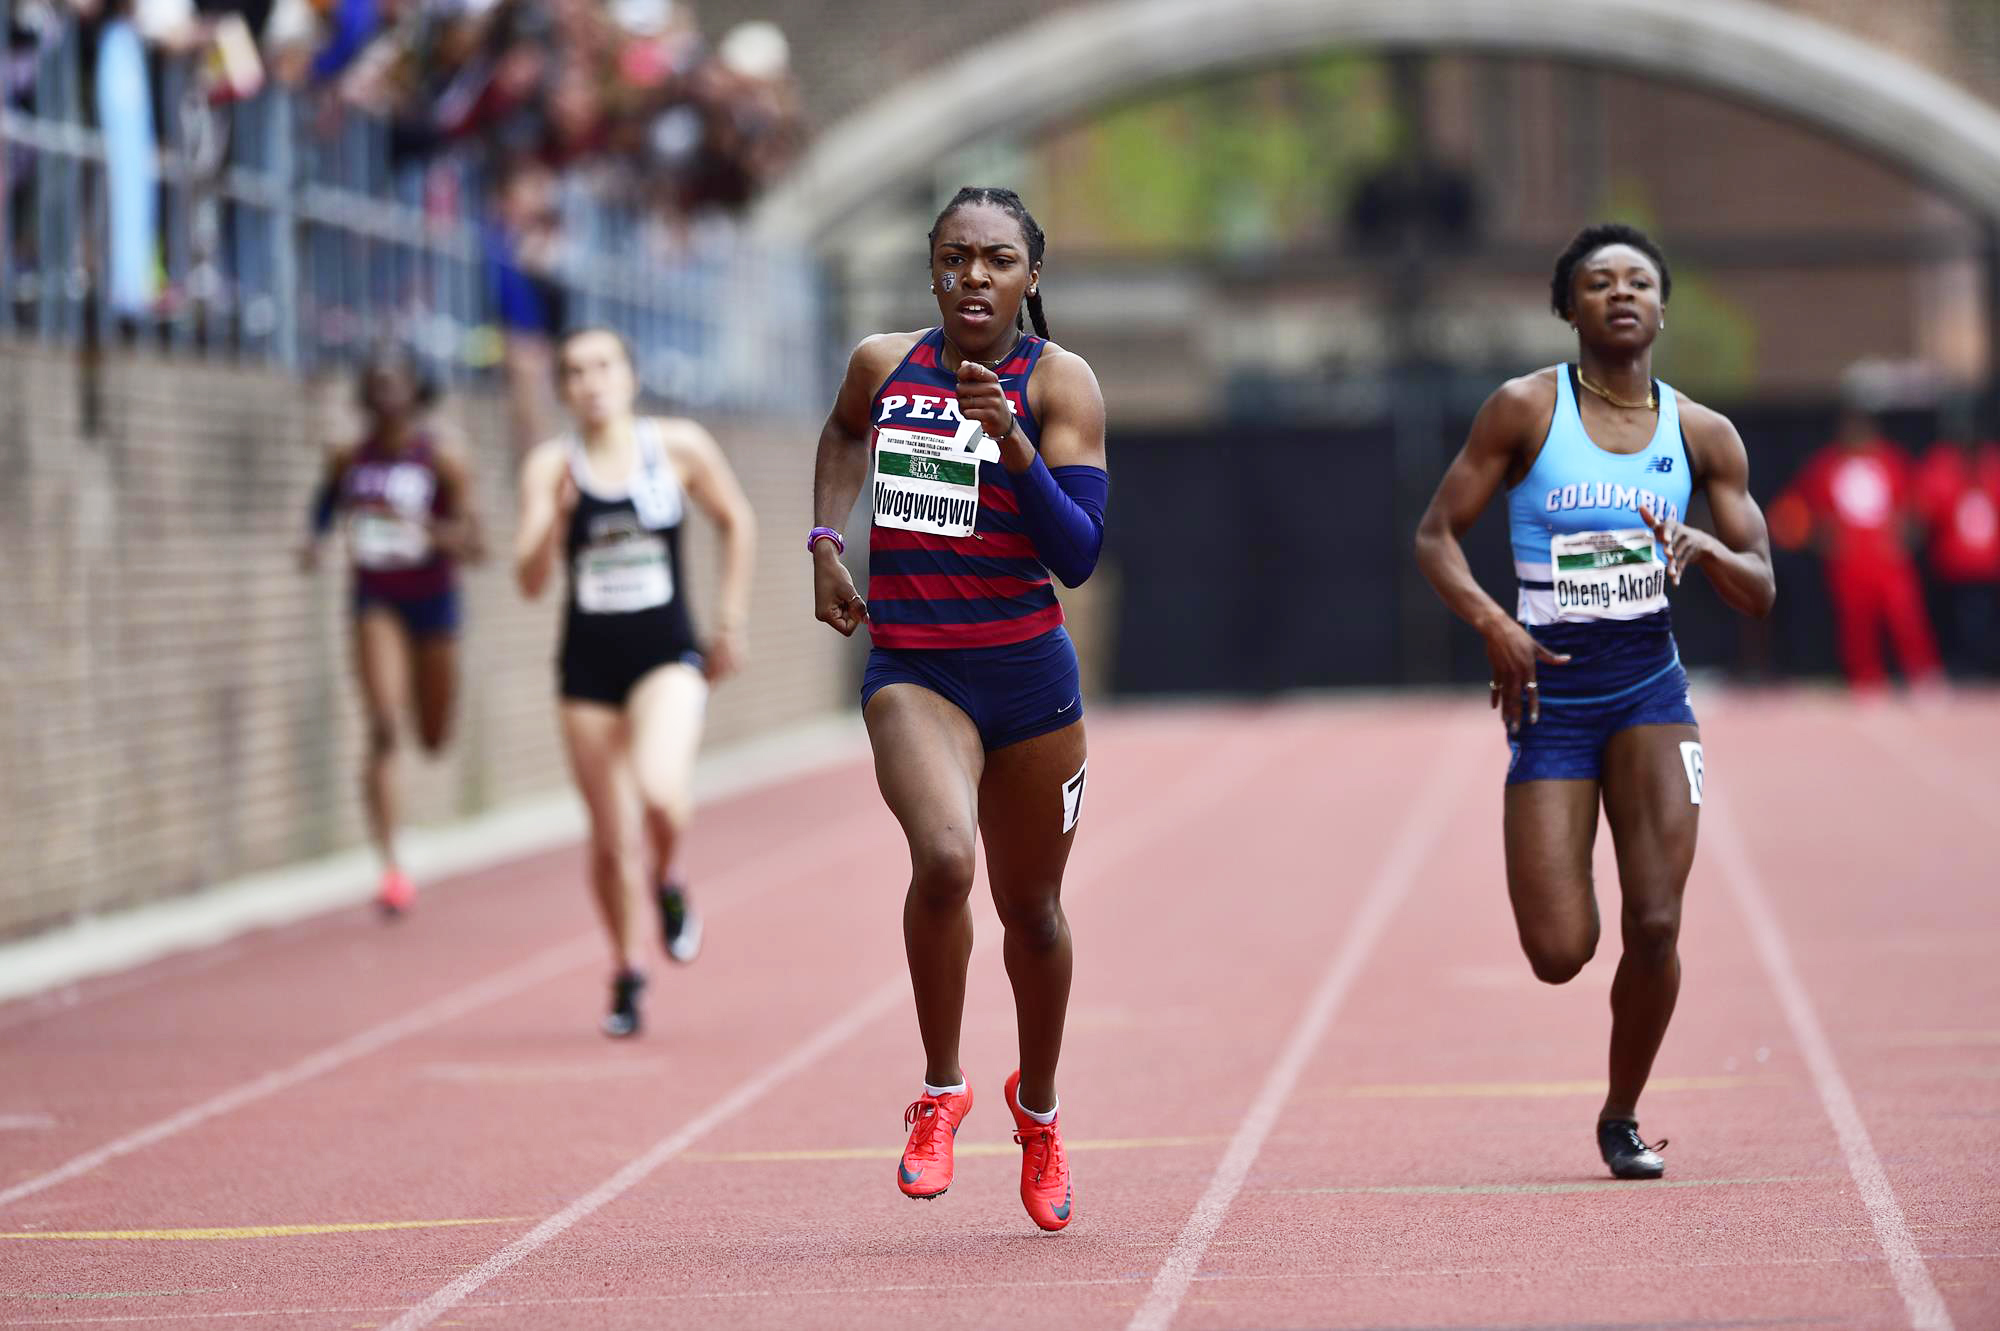 Uchechi Nwogwugwu of the track and field team runs at the front of the pack during a race.